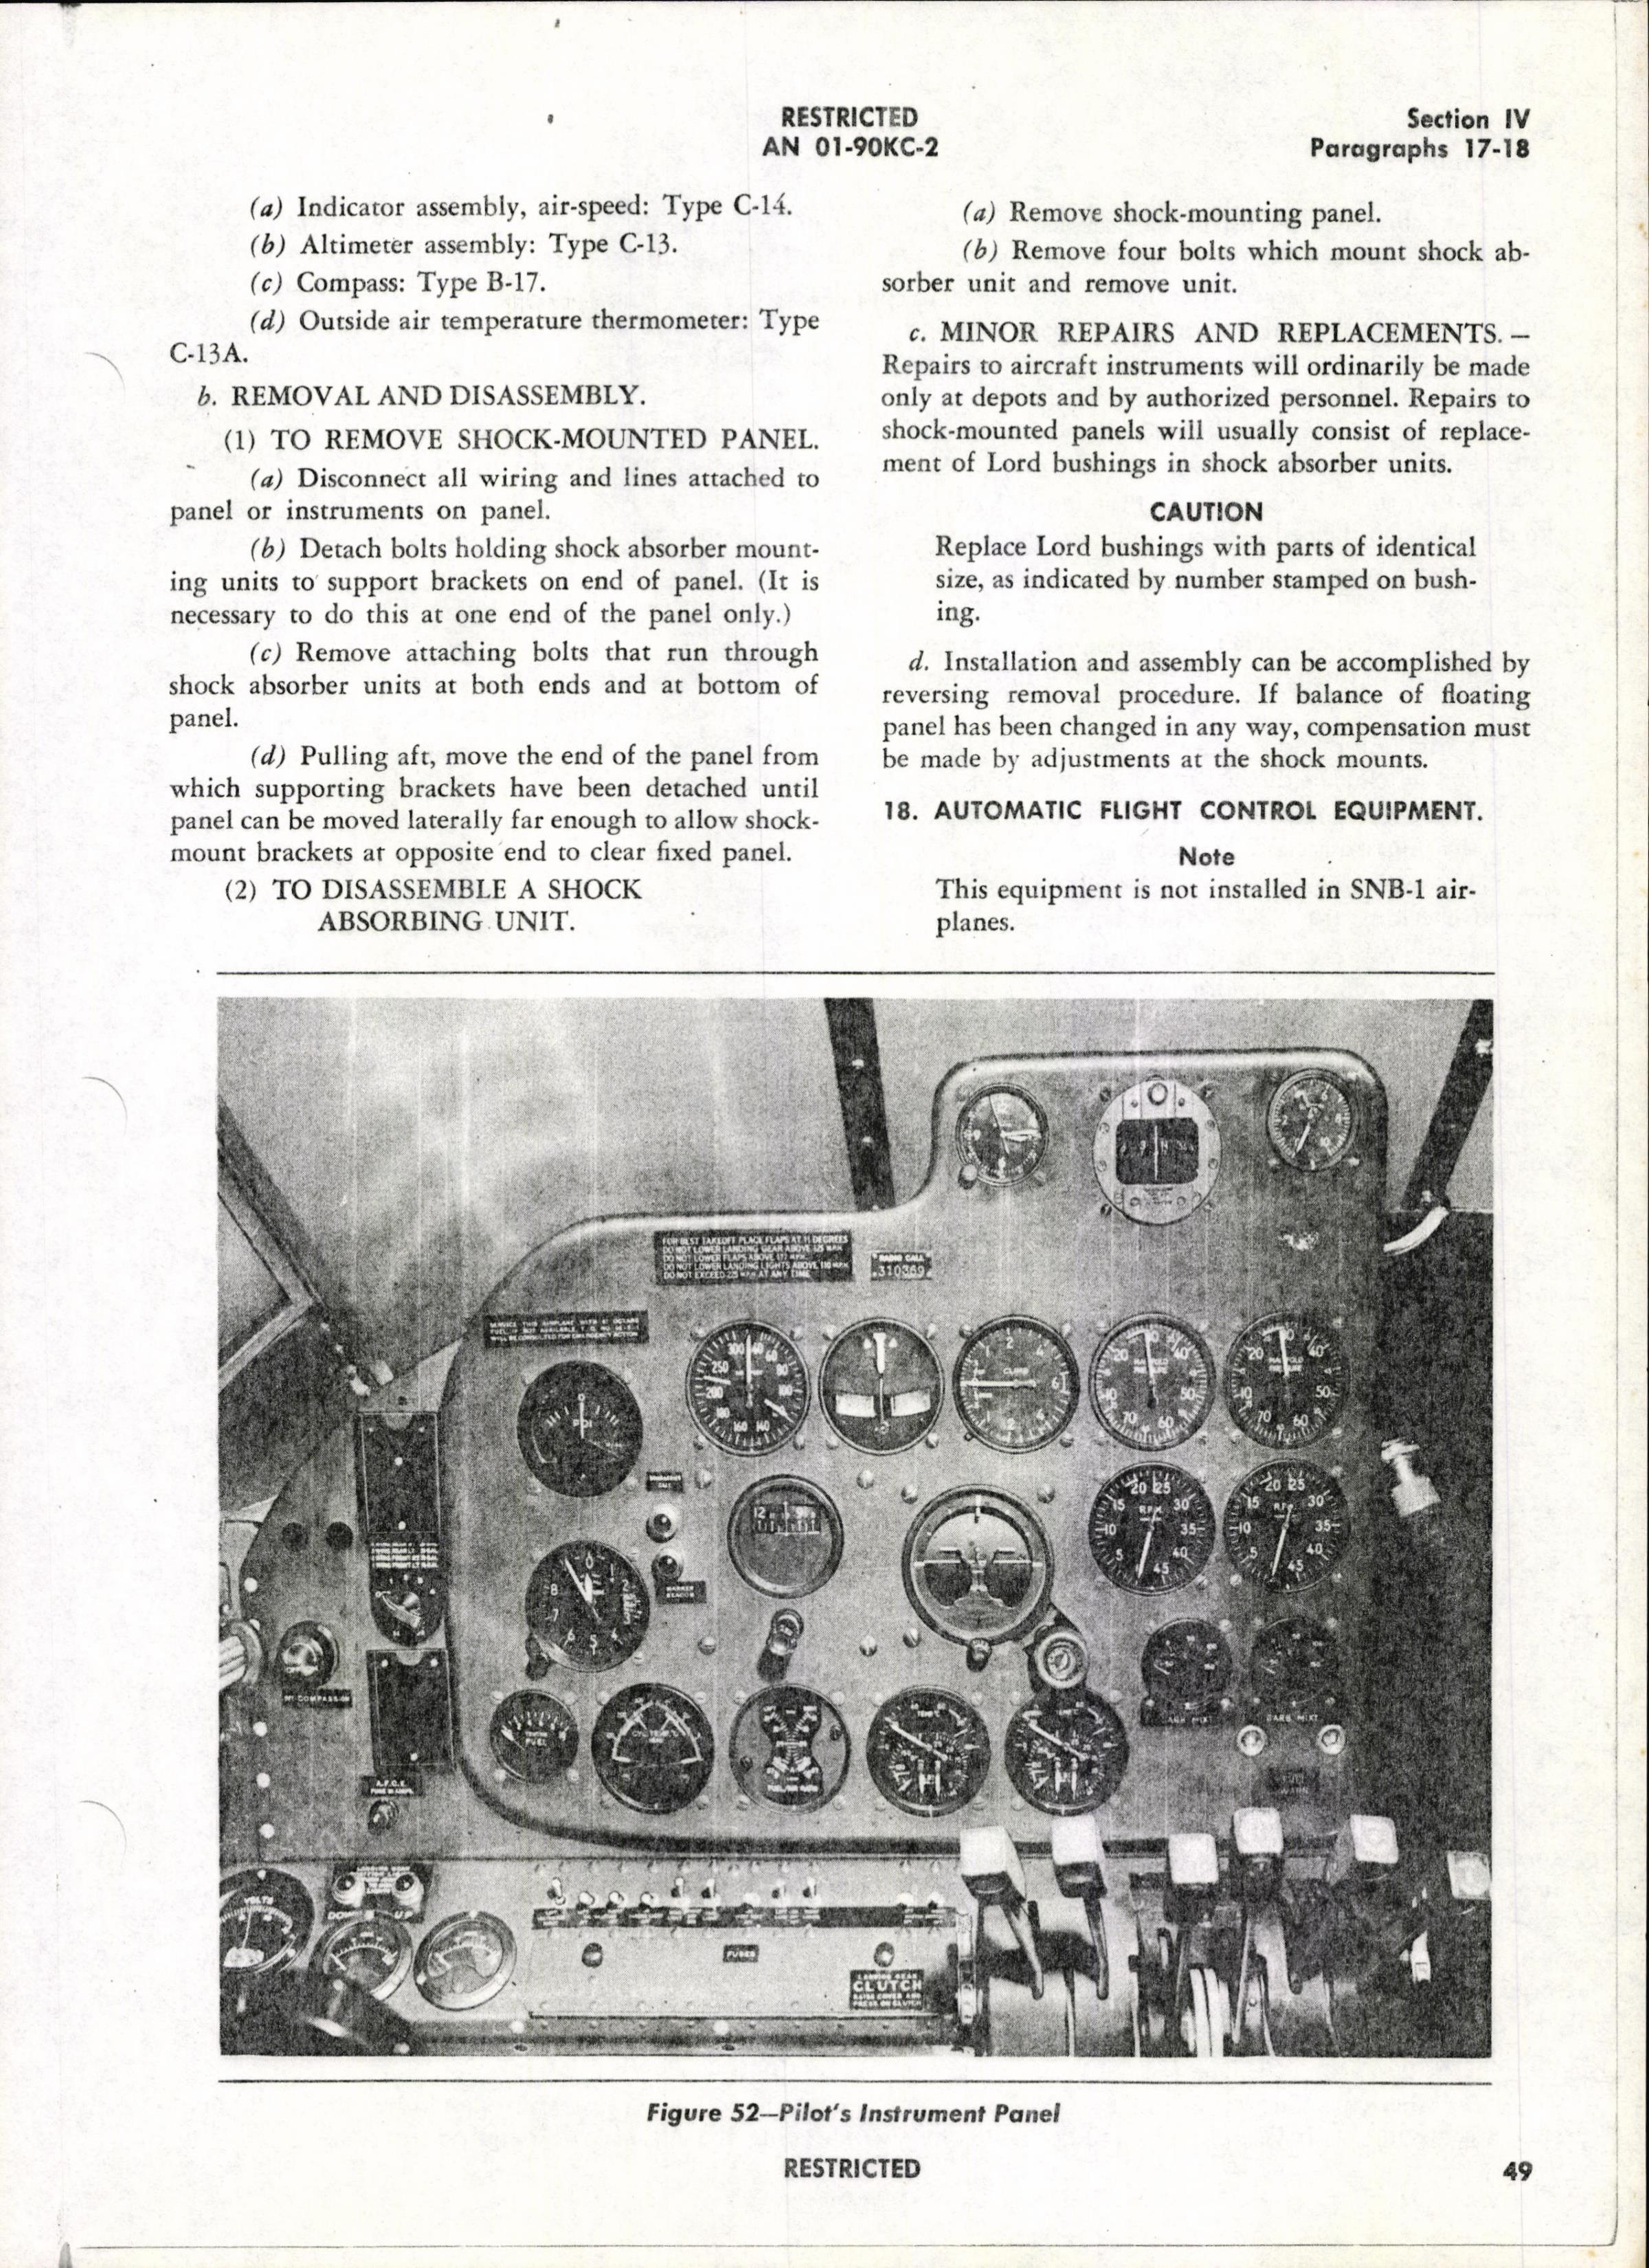 Sample page 54 from AirCorps Library document: Erection and Maintenance Instructions - AT-11 